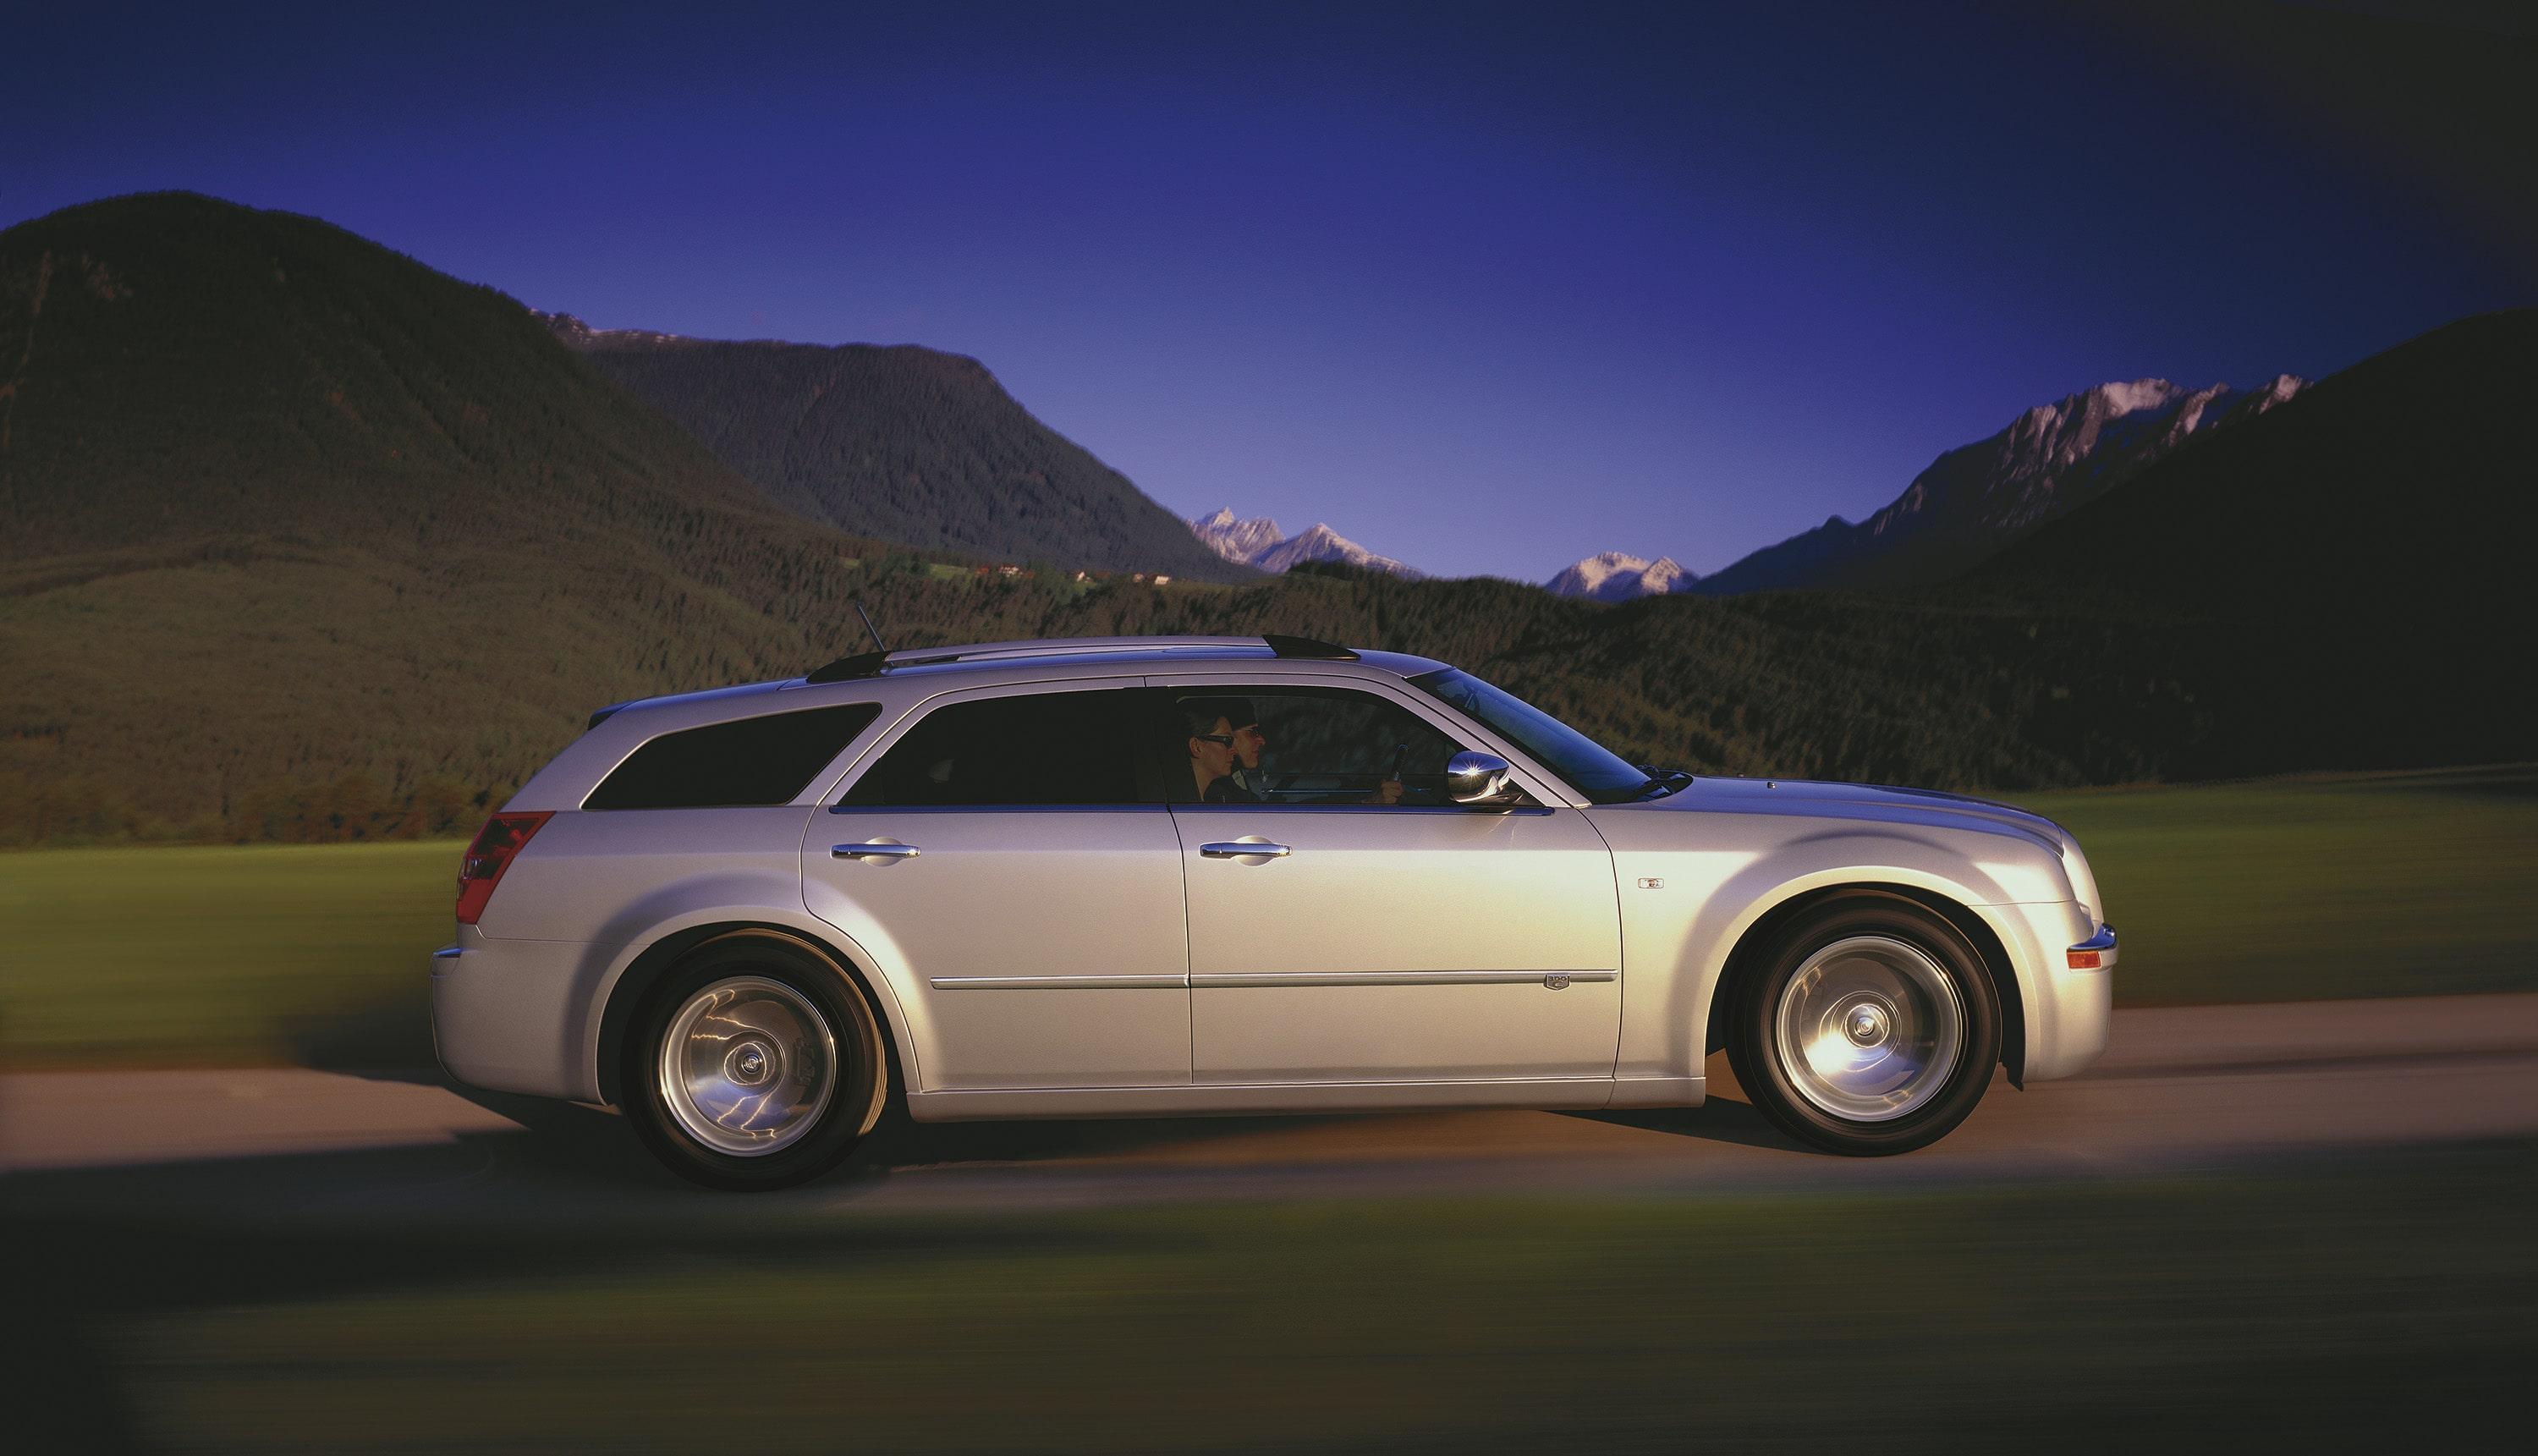 The Chrysler 300C Touring wagon was much more expensive than its sedan counterpart.